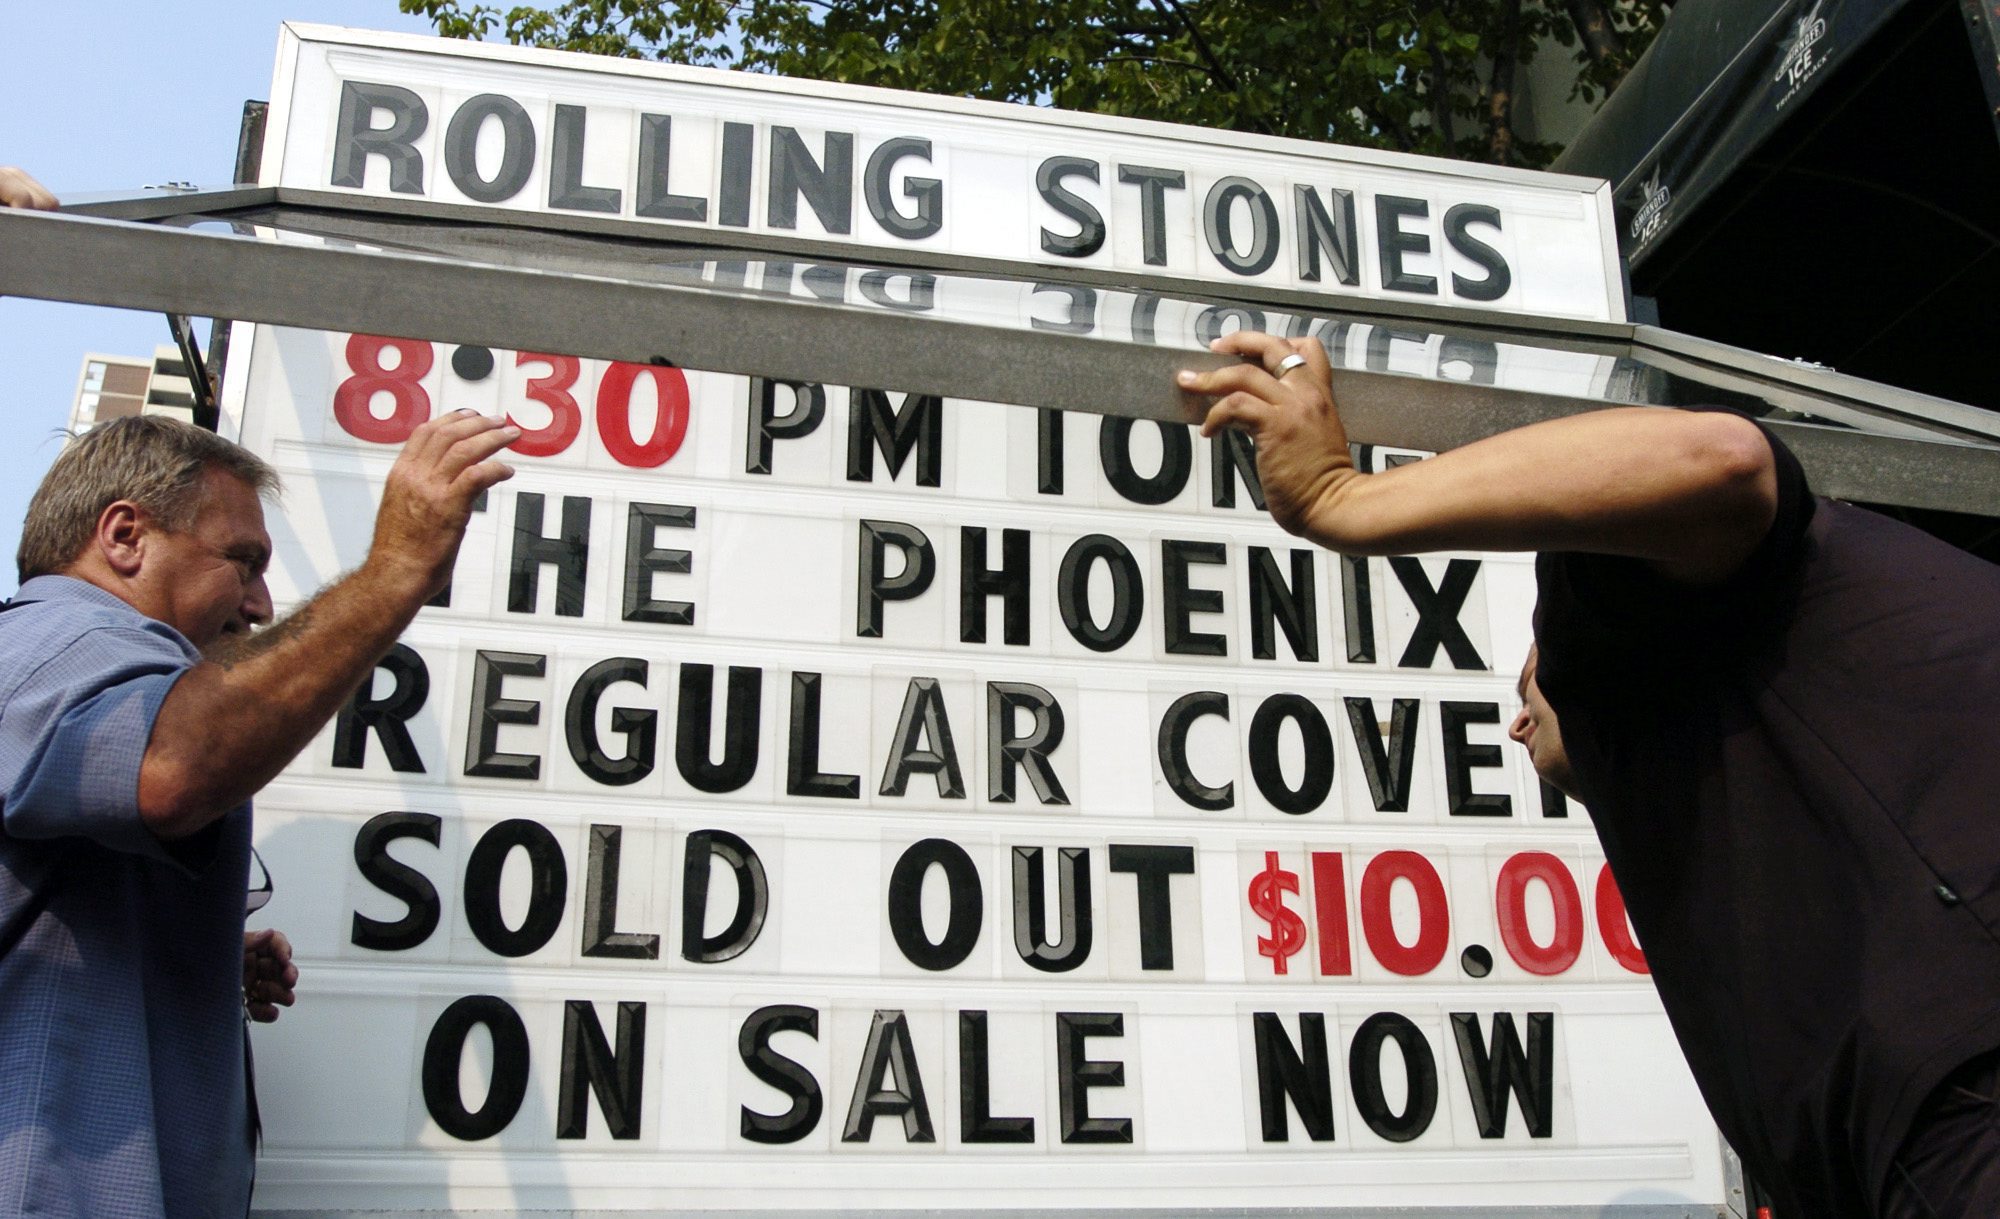 Toronto’s Phoenix Concert Theatre to close after 33 years in business